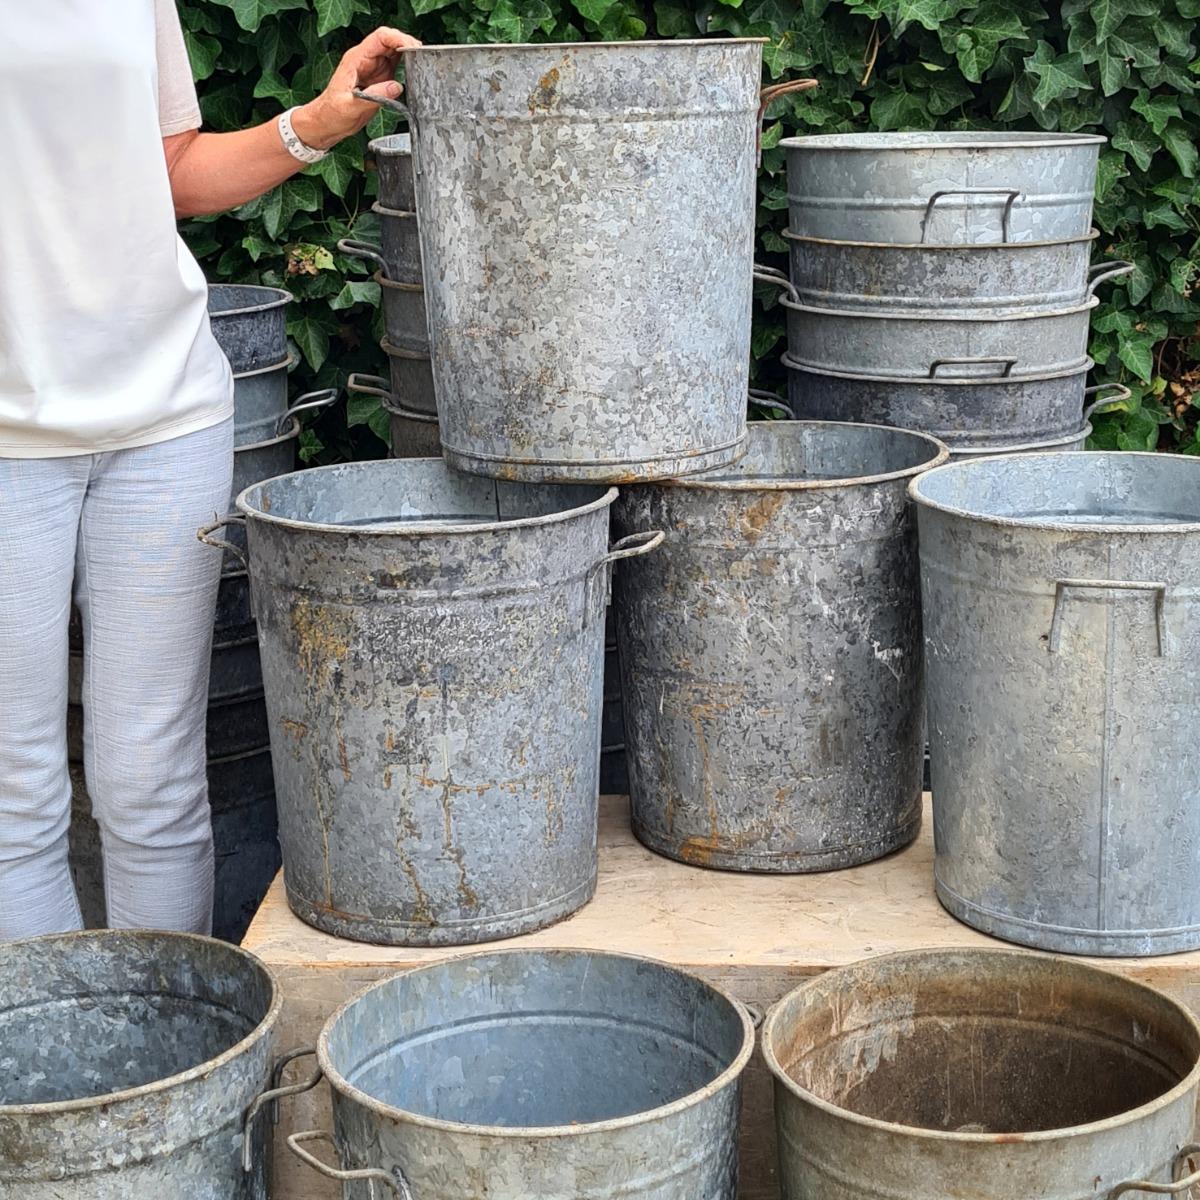 40 galvanized metal containers